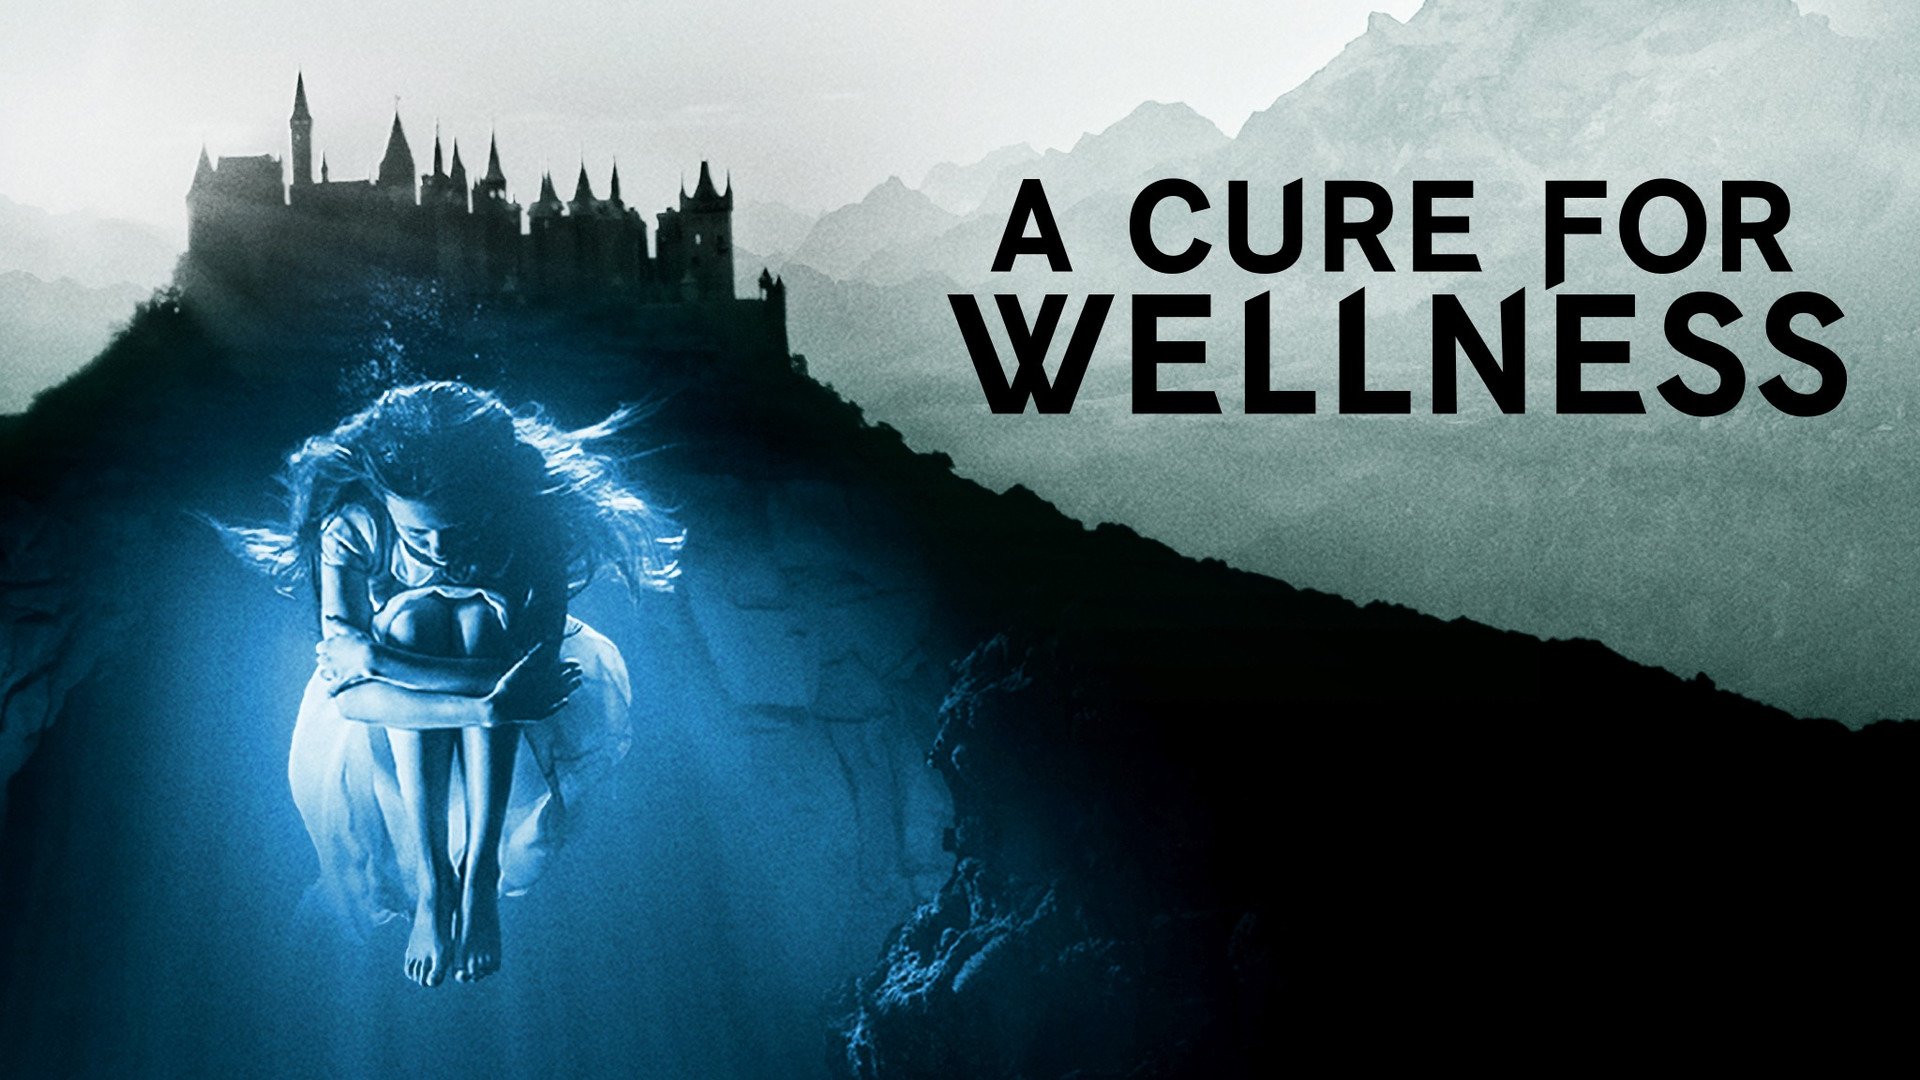 A Cure For Wellness Wallpaper.